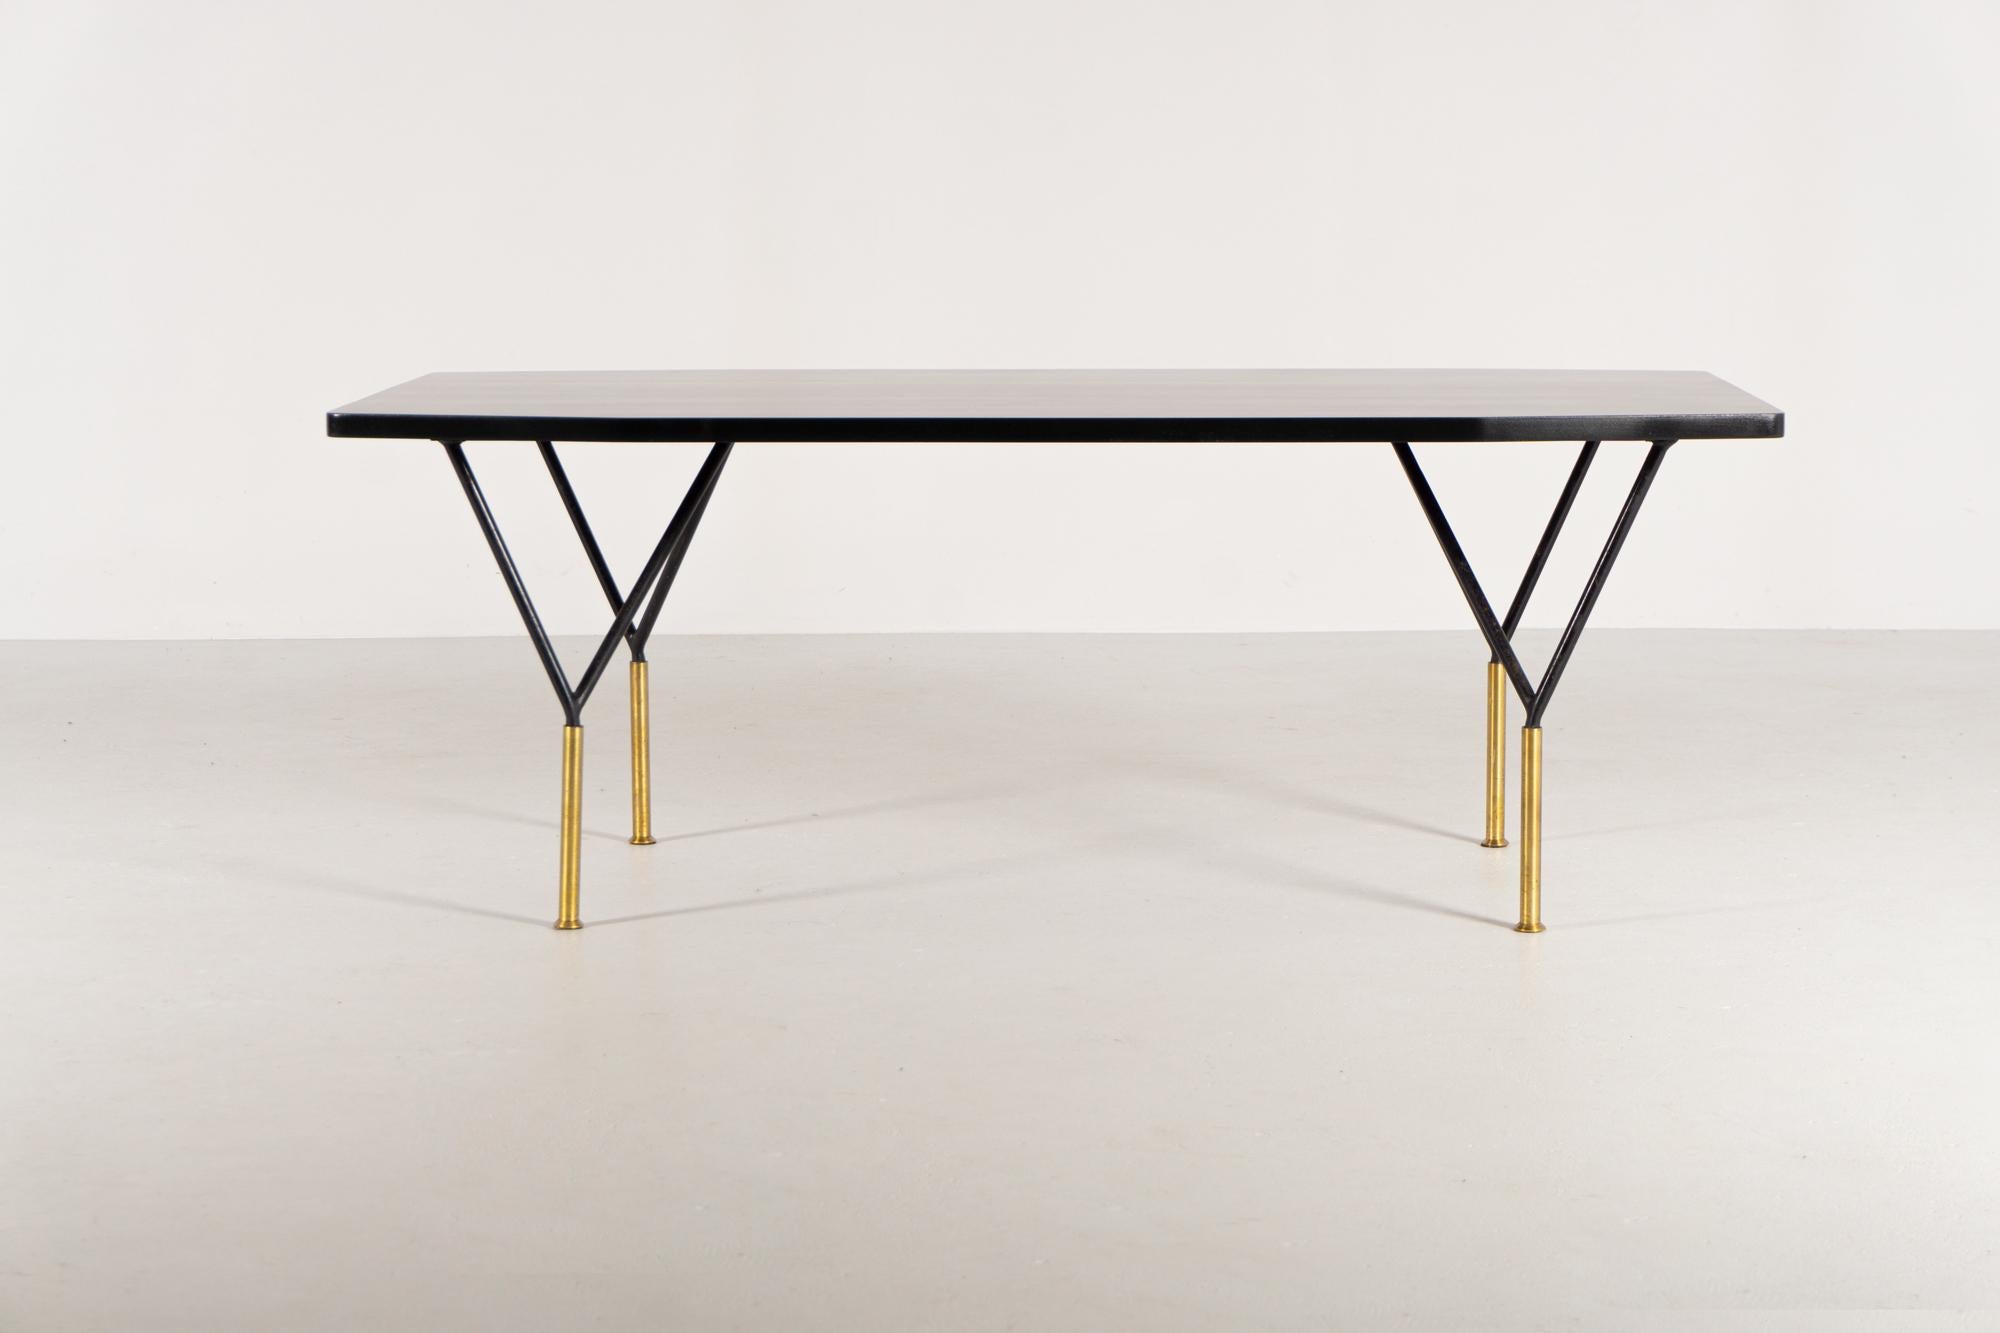 Elegant Coffee-Table (Model 755) by Italian architect and designer Carlo de Carli.

Ash wood table top, stained and lacquered black,  black-lacquered metal construction and brass

Reference:
Esempi, Tavoli Tavolini Carrelli,Seconda Serie, Hoepli,